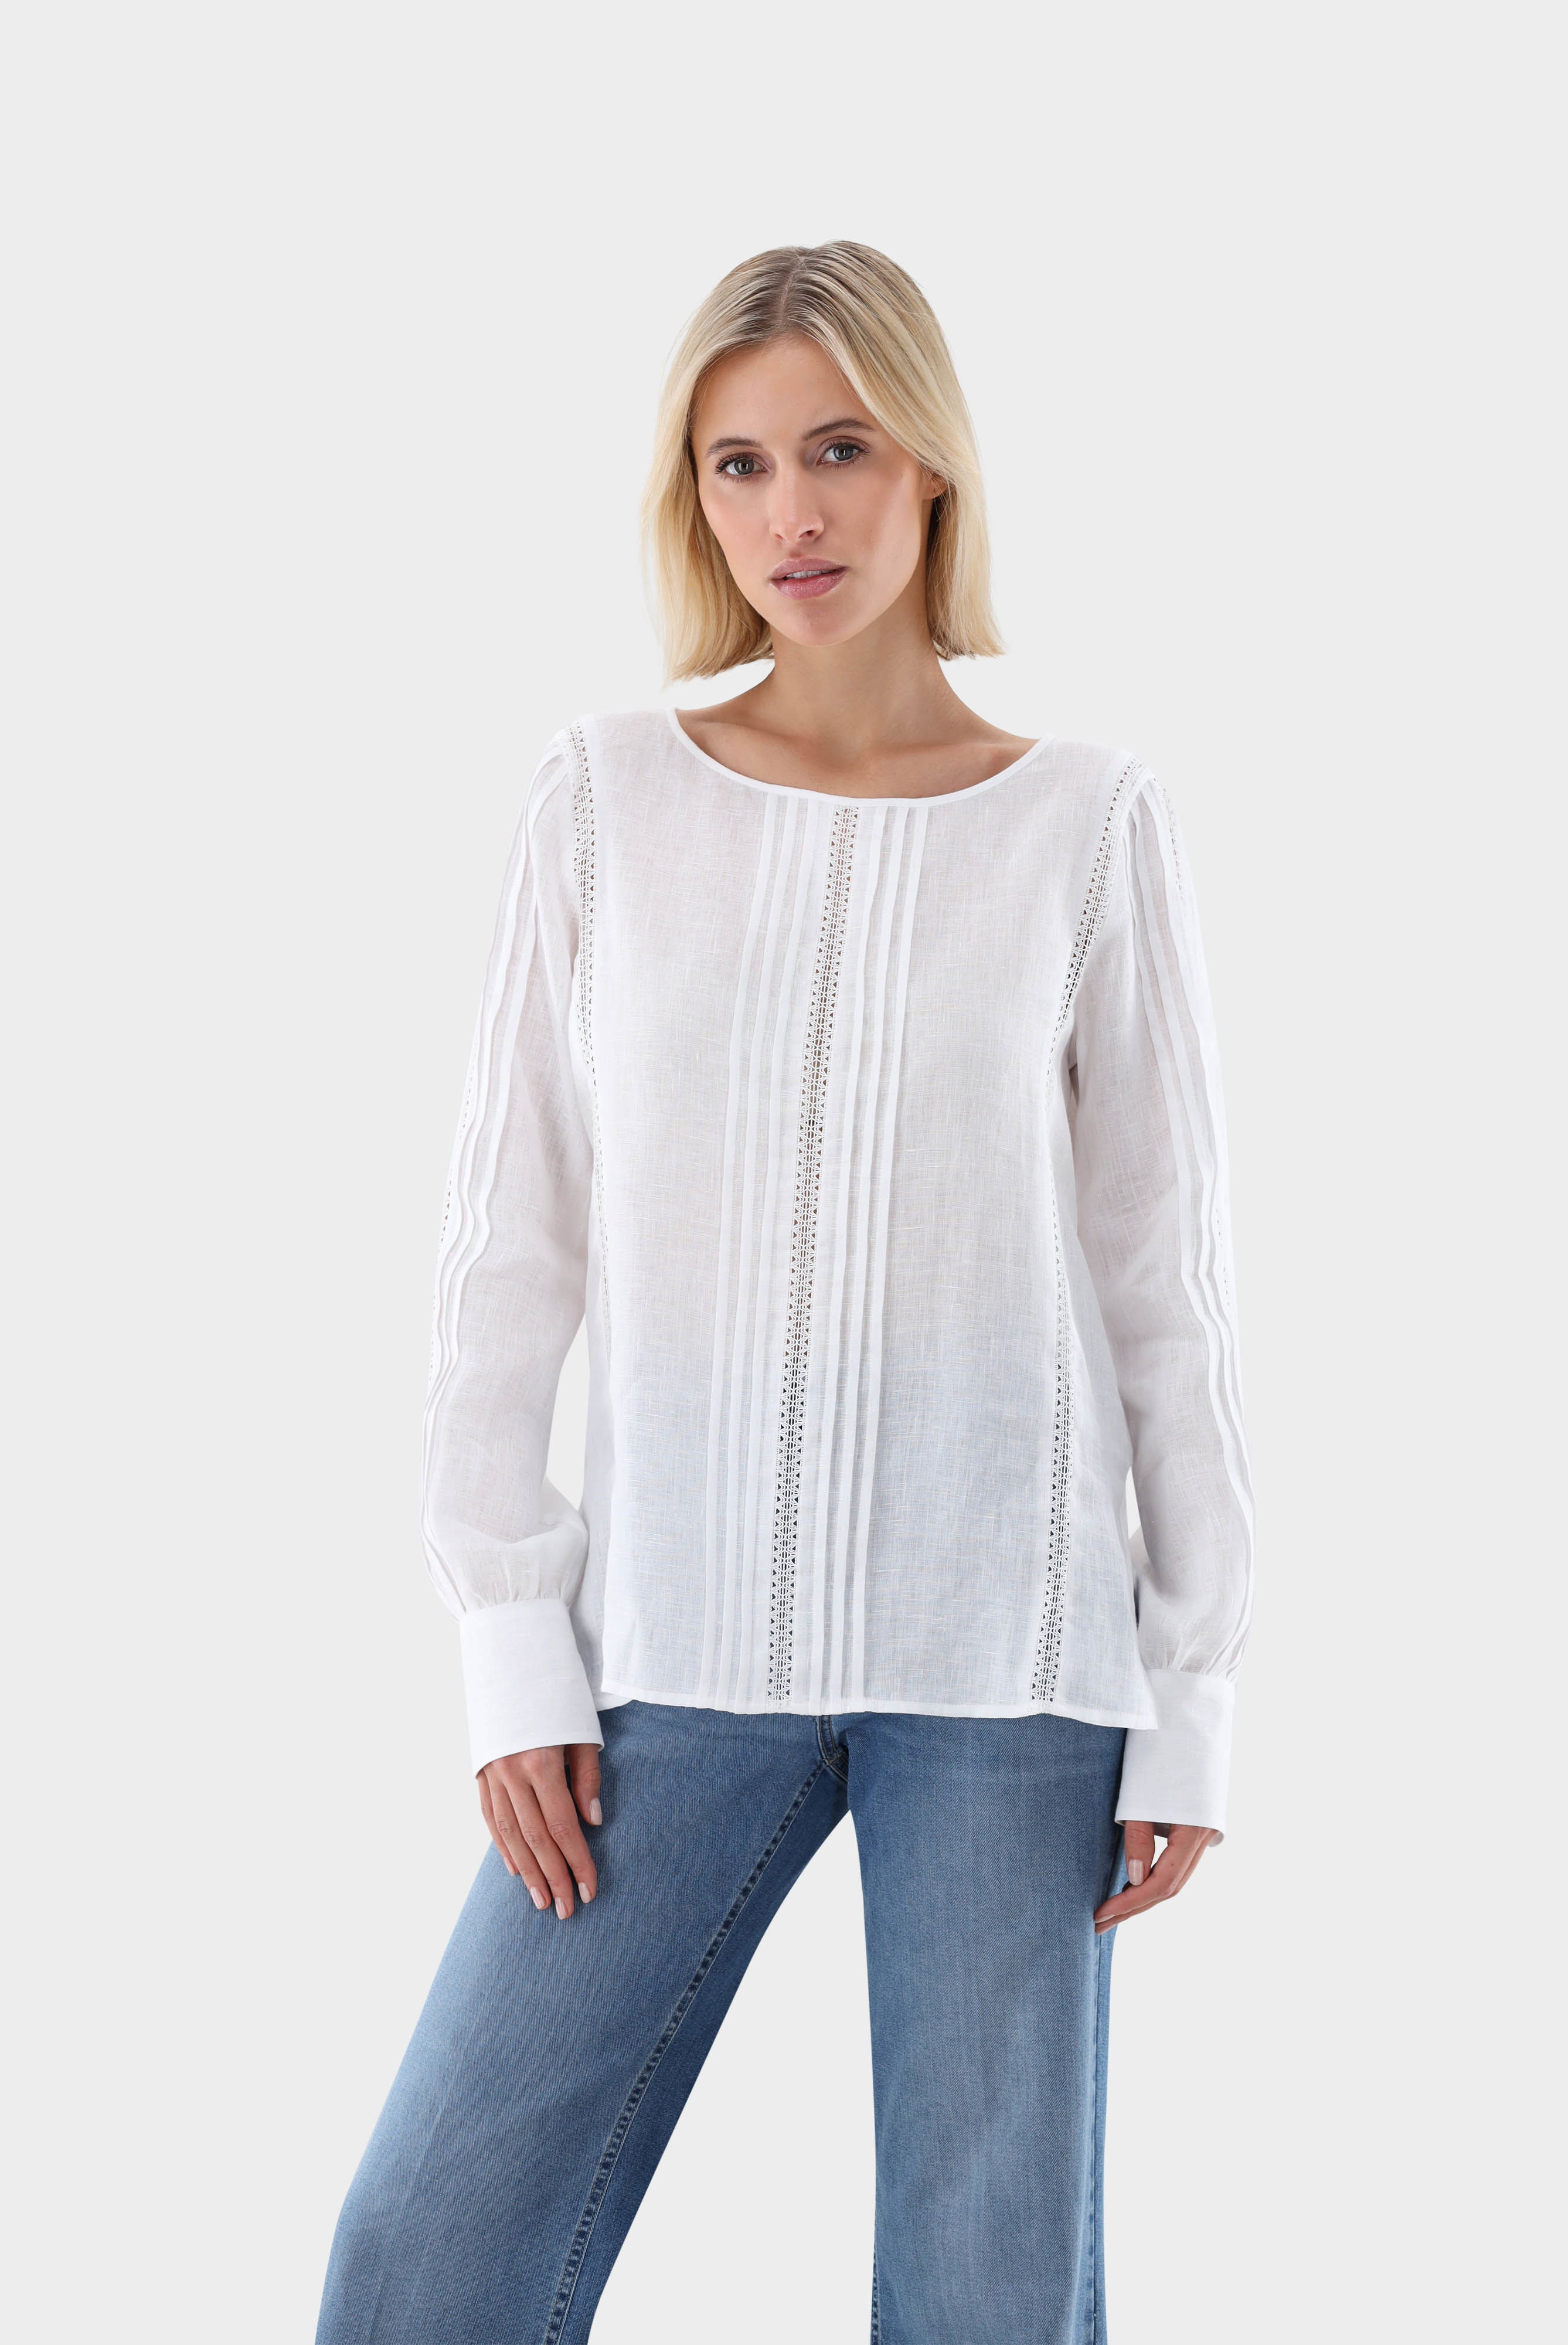 Slip on Blouse with Lace Inserts